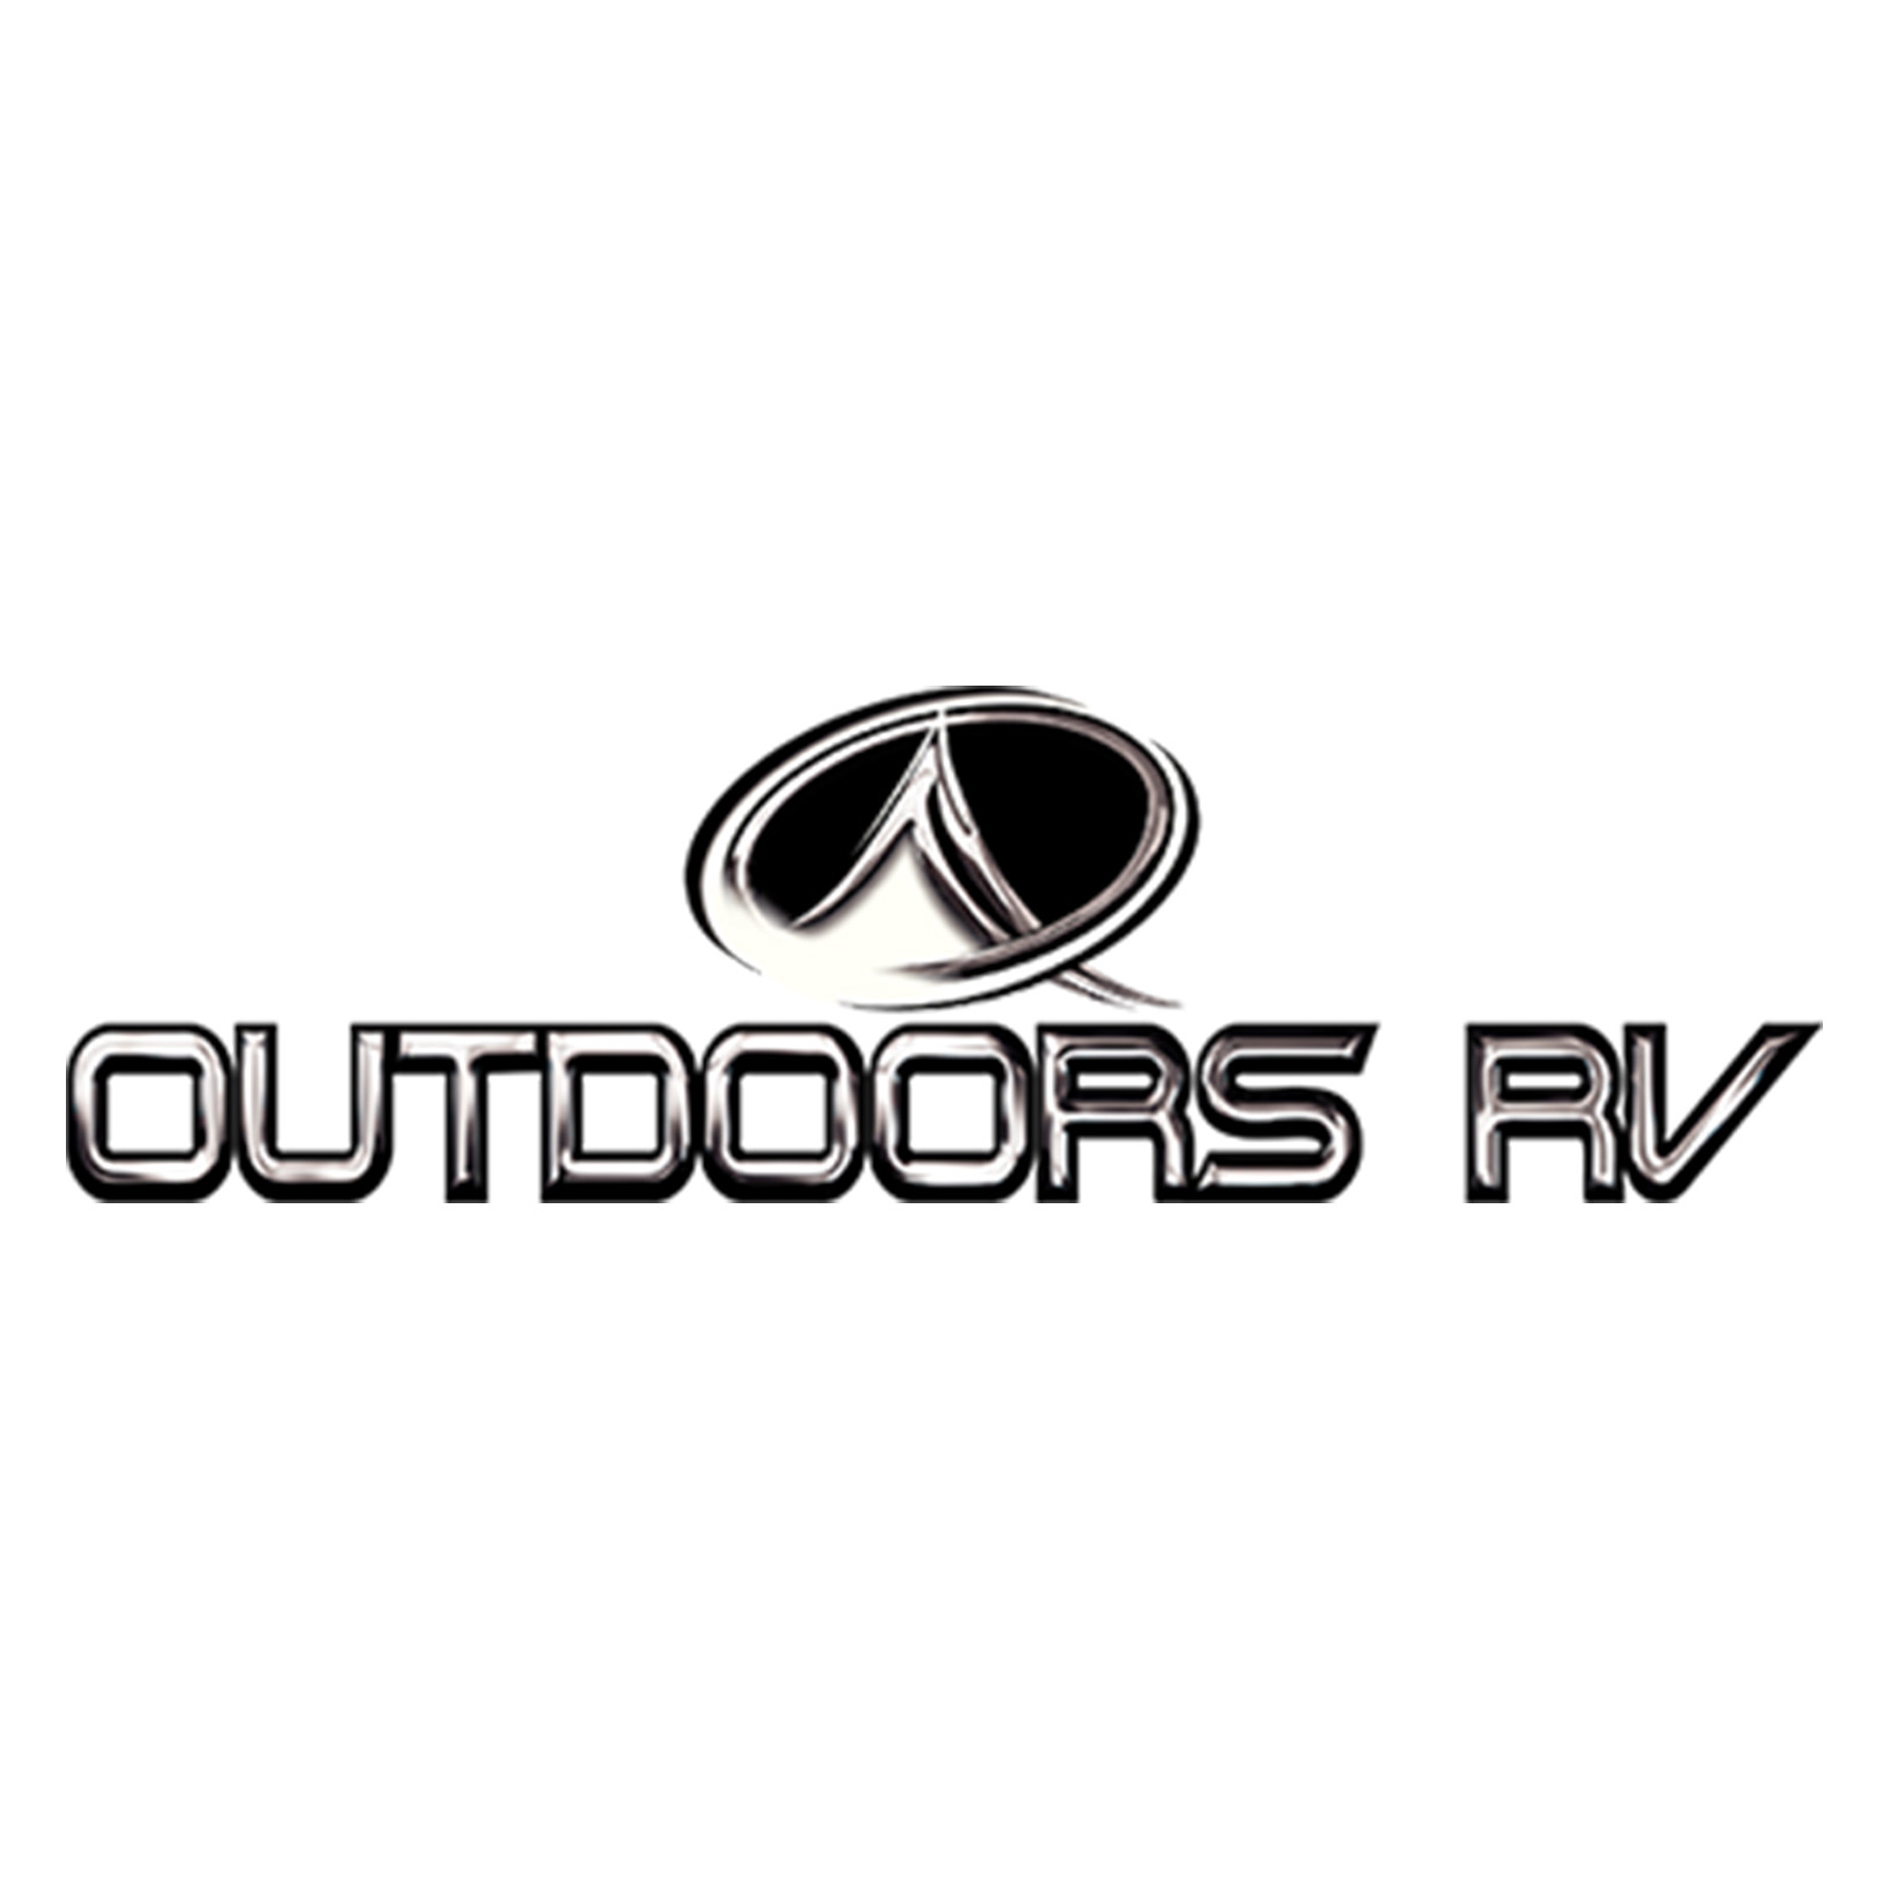 Outdoors rv manufacturing